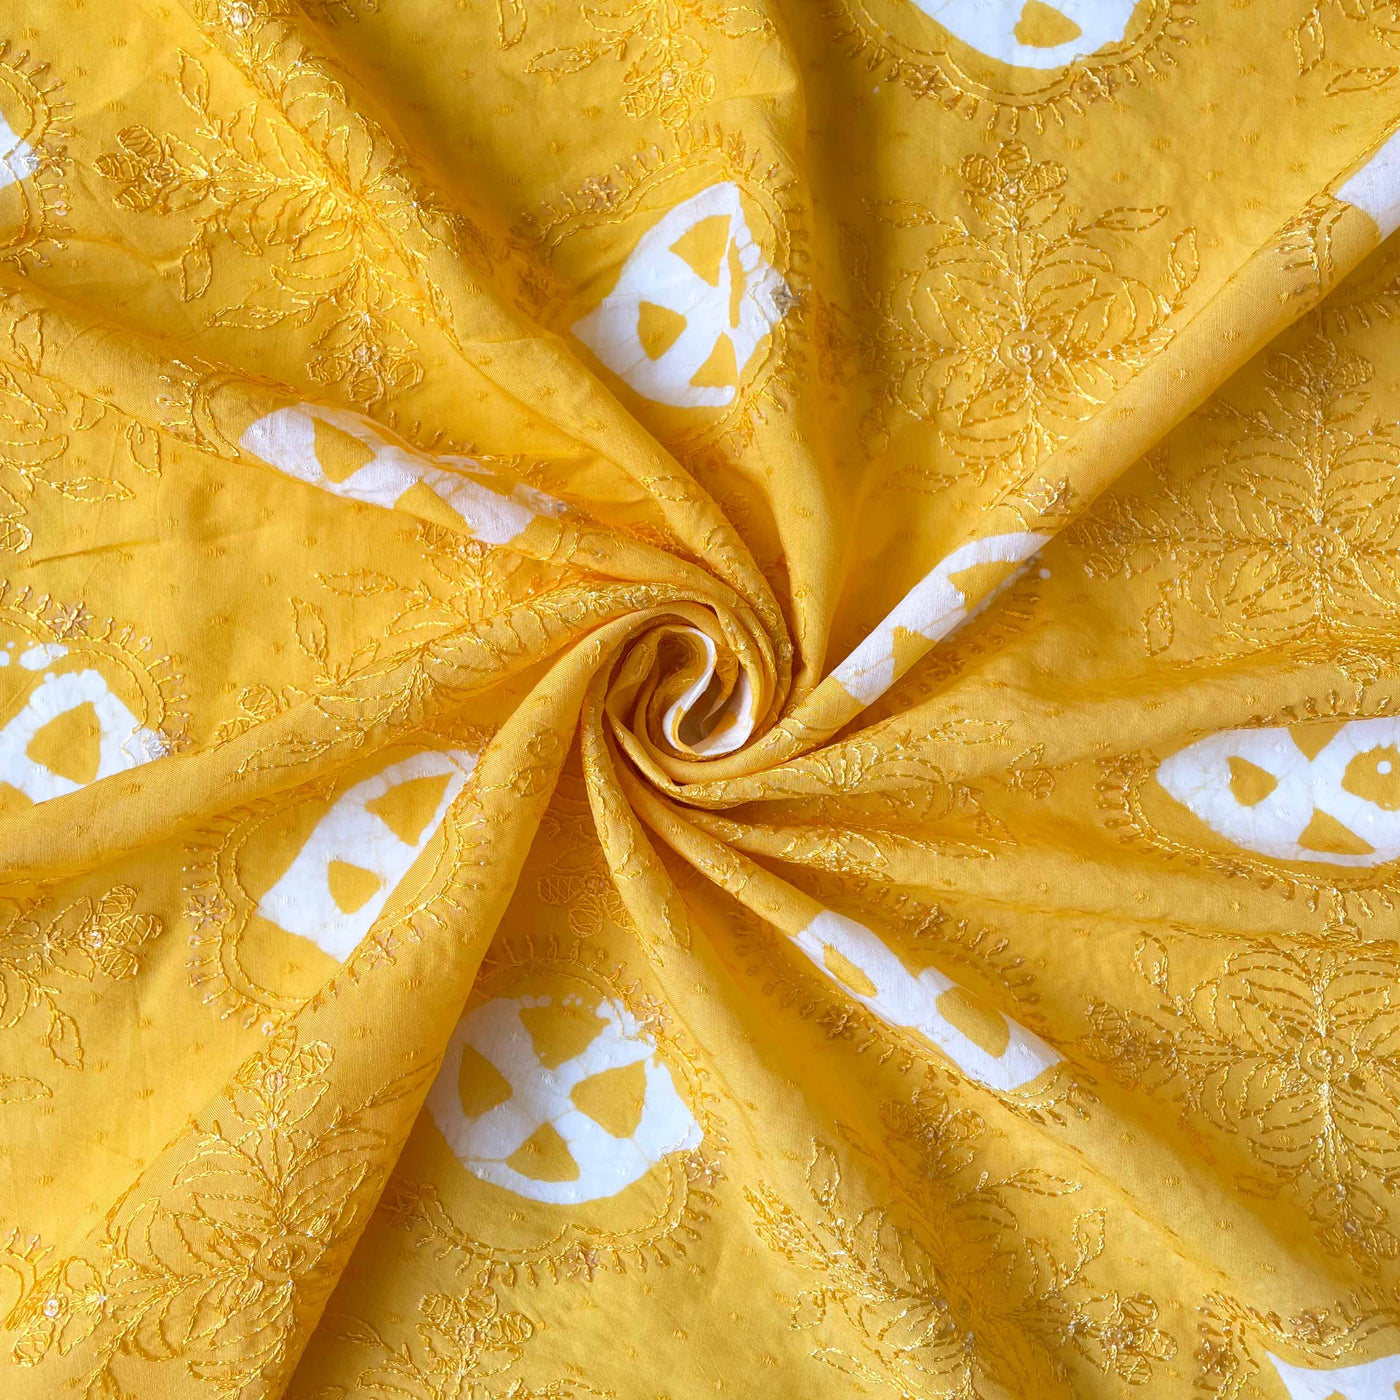 Embroidered Fabrics Fabric Bright Yellow Sequence Embroidered Batik Printed Pure Cotton Dobby Butta Fabric (Width 42 Inches)